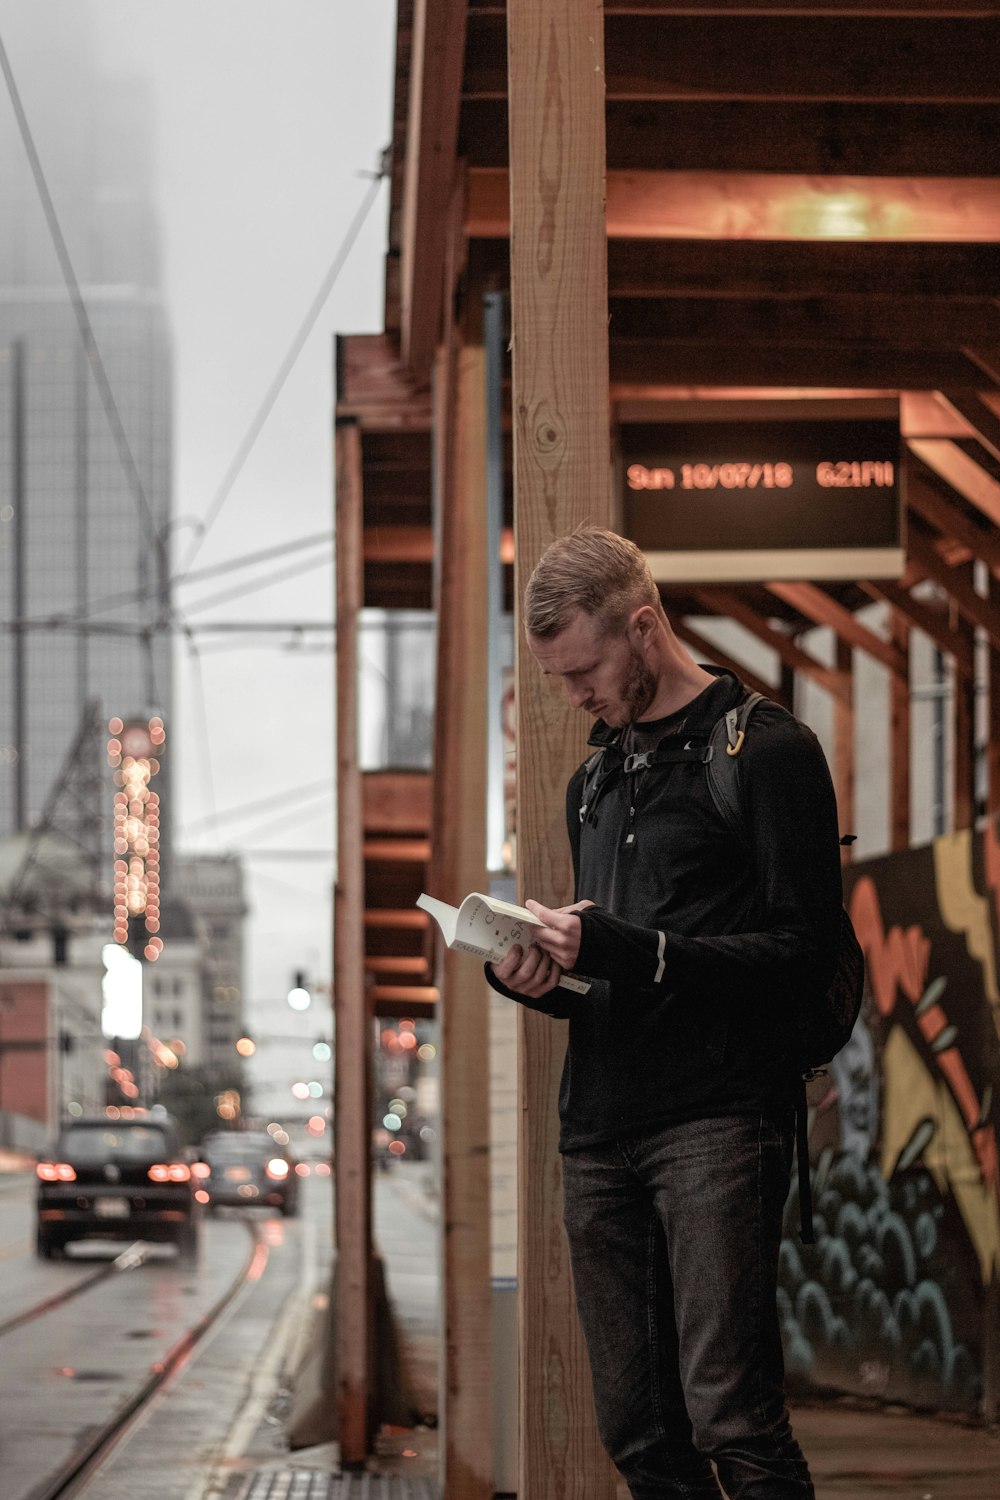 man in black sweater stands on sidewalk with book in hand